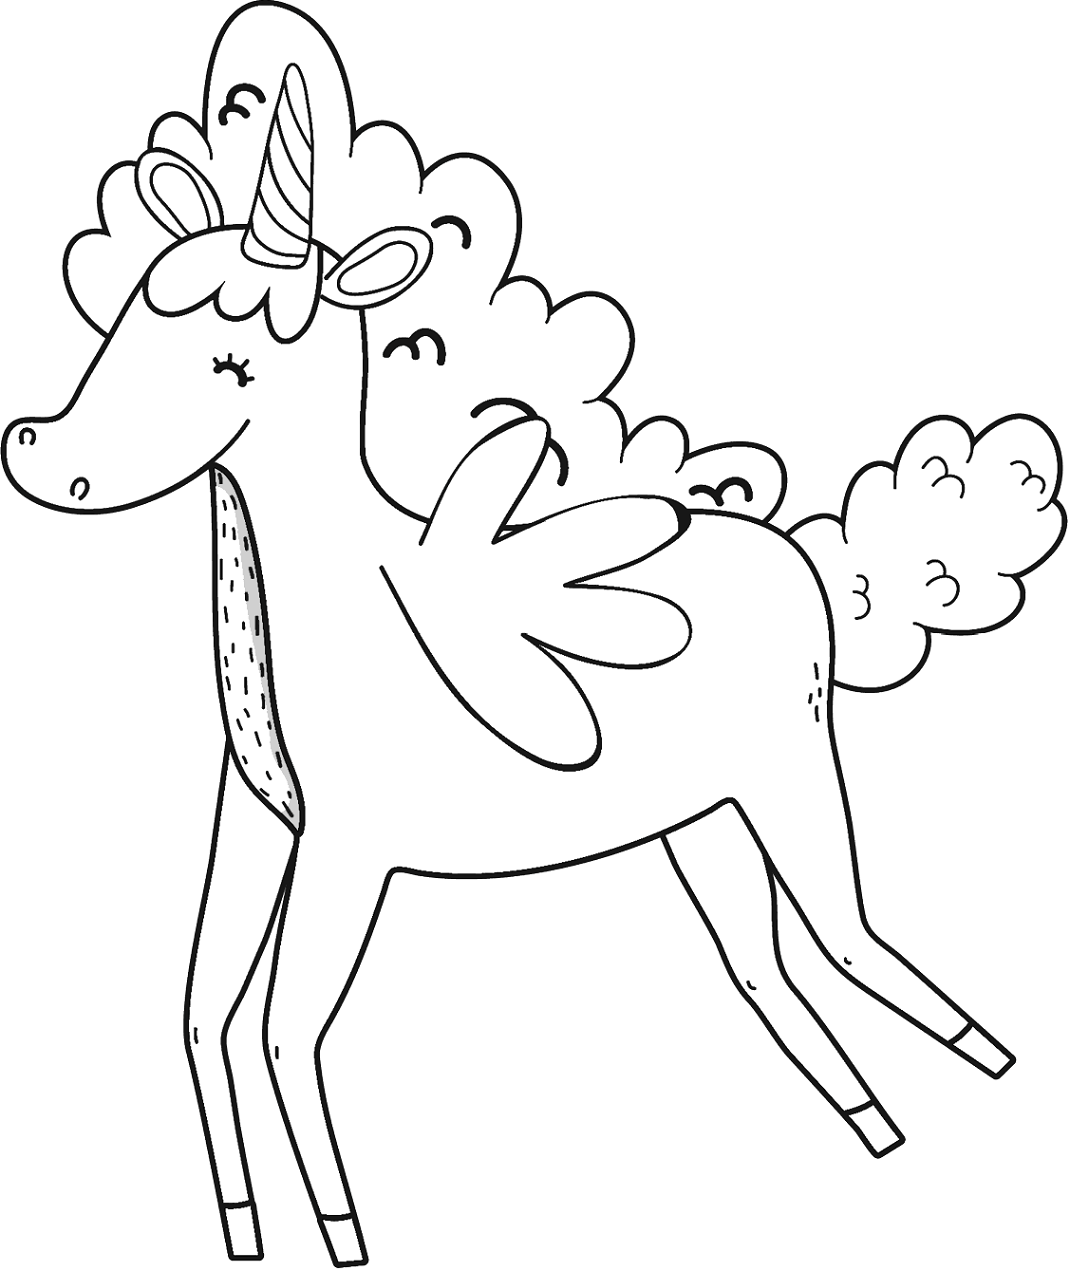 Unicorn Has Cute Wings Coloring Page